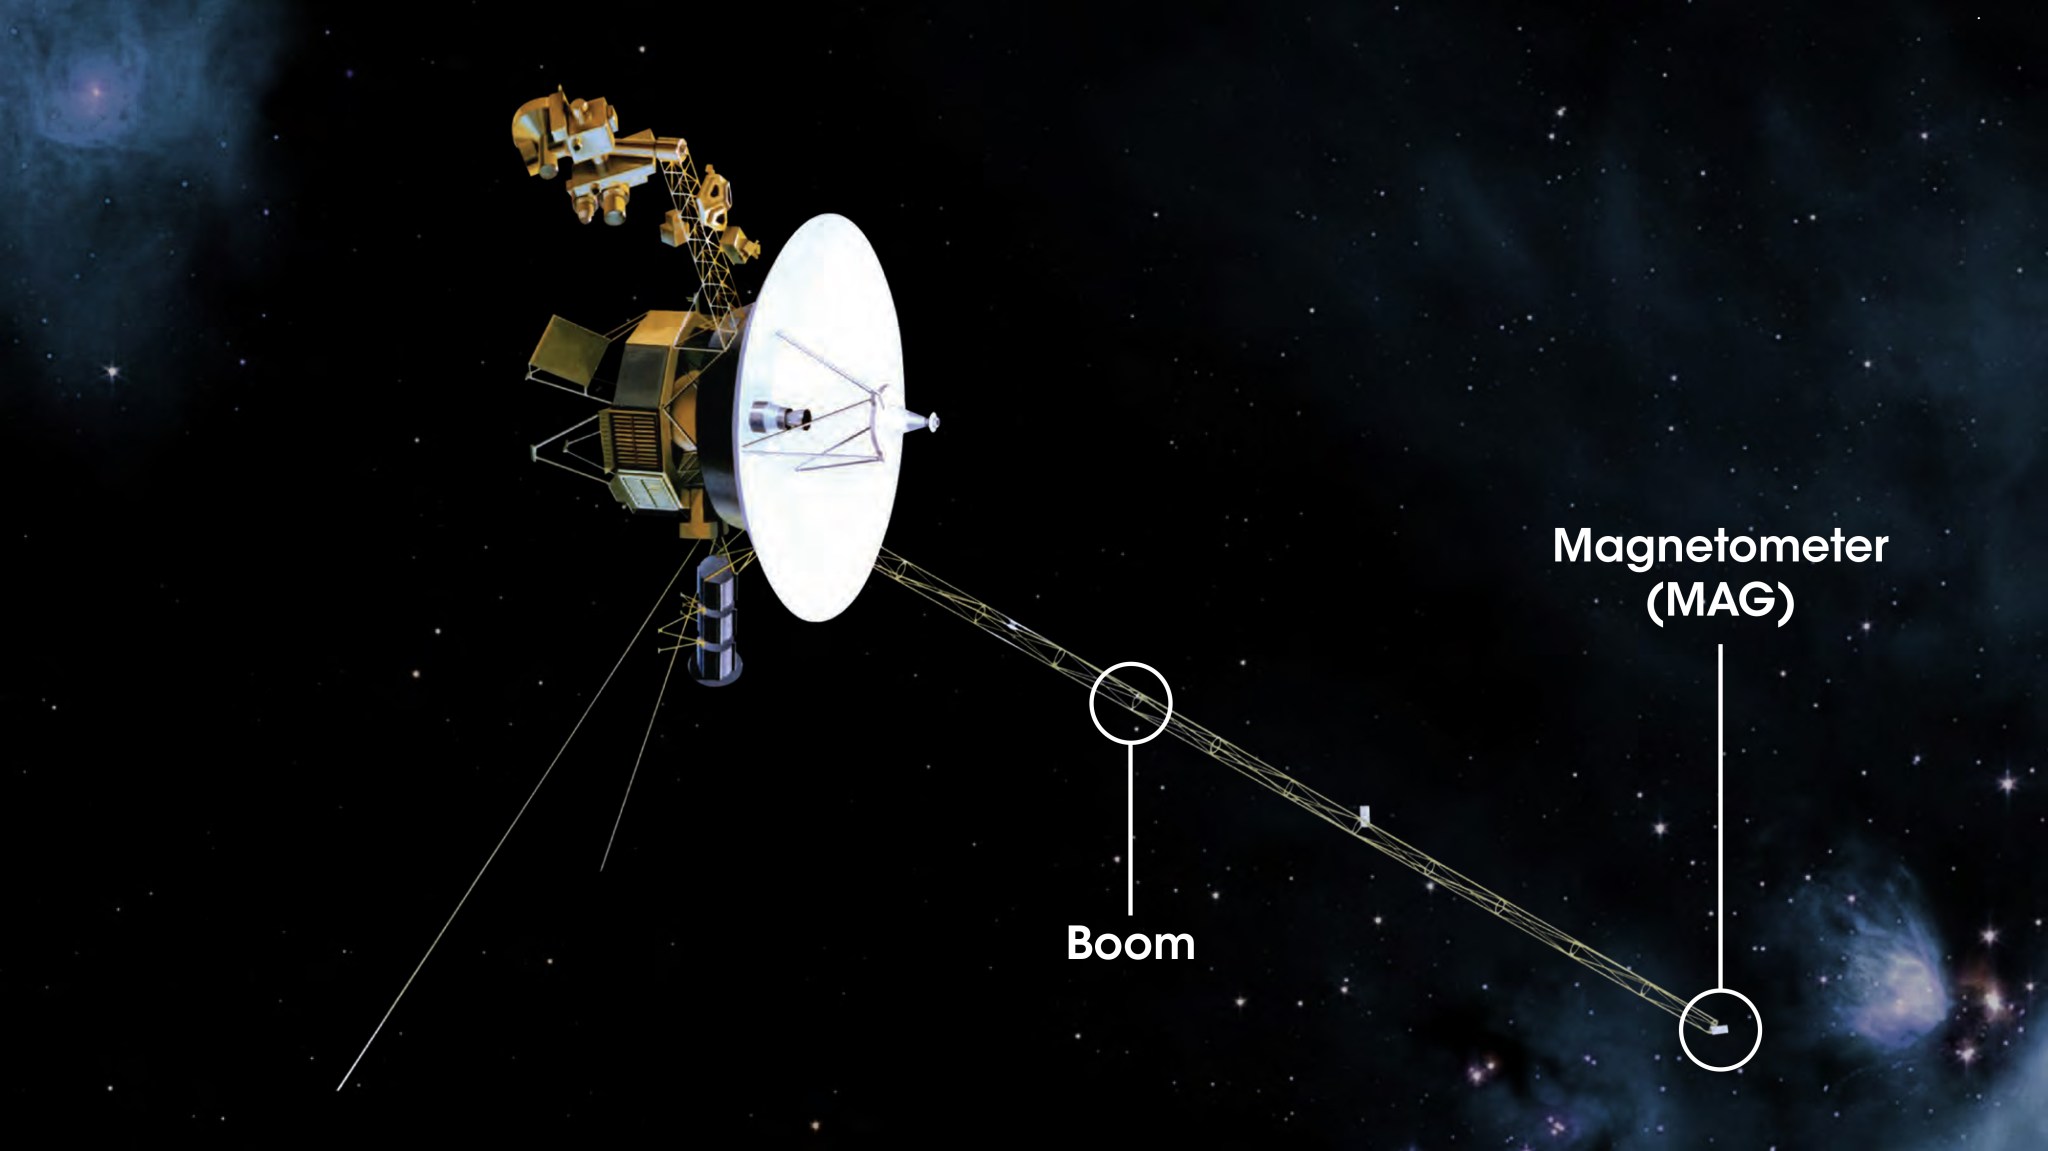 Illustration of Voyager, a gold spacecraft with a large white satellite dish and spindly antenna. A spindly arm is labeled "Boom" and at the end, an instrument is labeled "Magnetometer (MAG)."